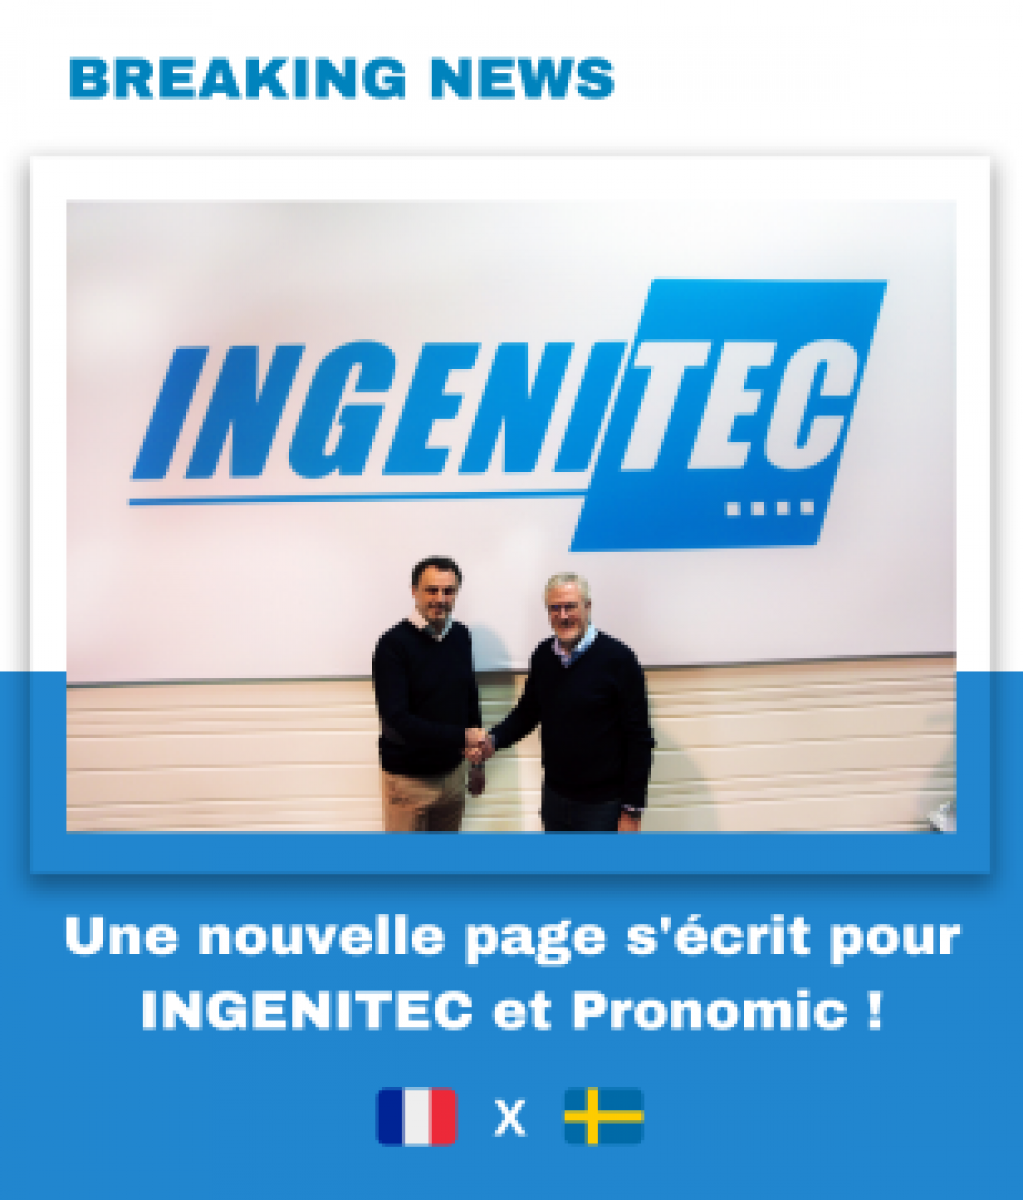 Ingenitec and Pronomic turn a new page